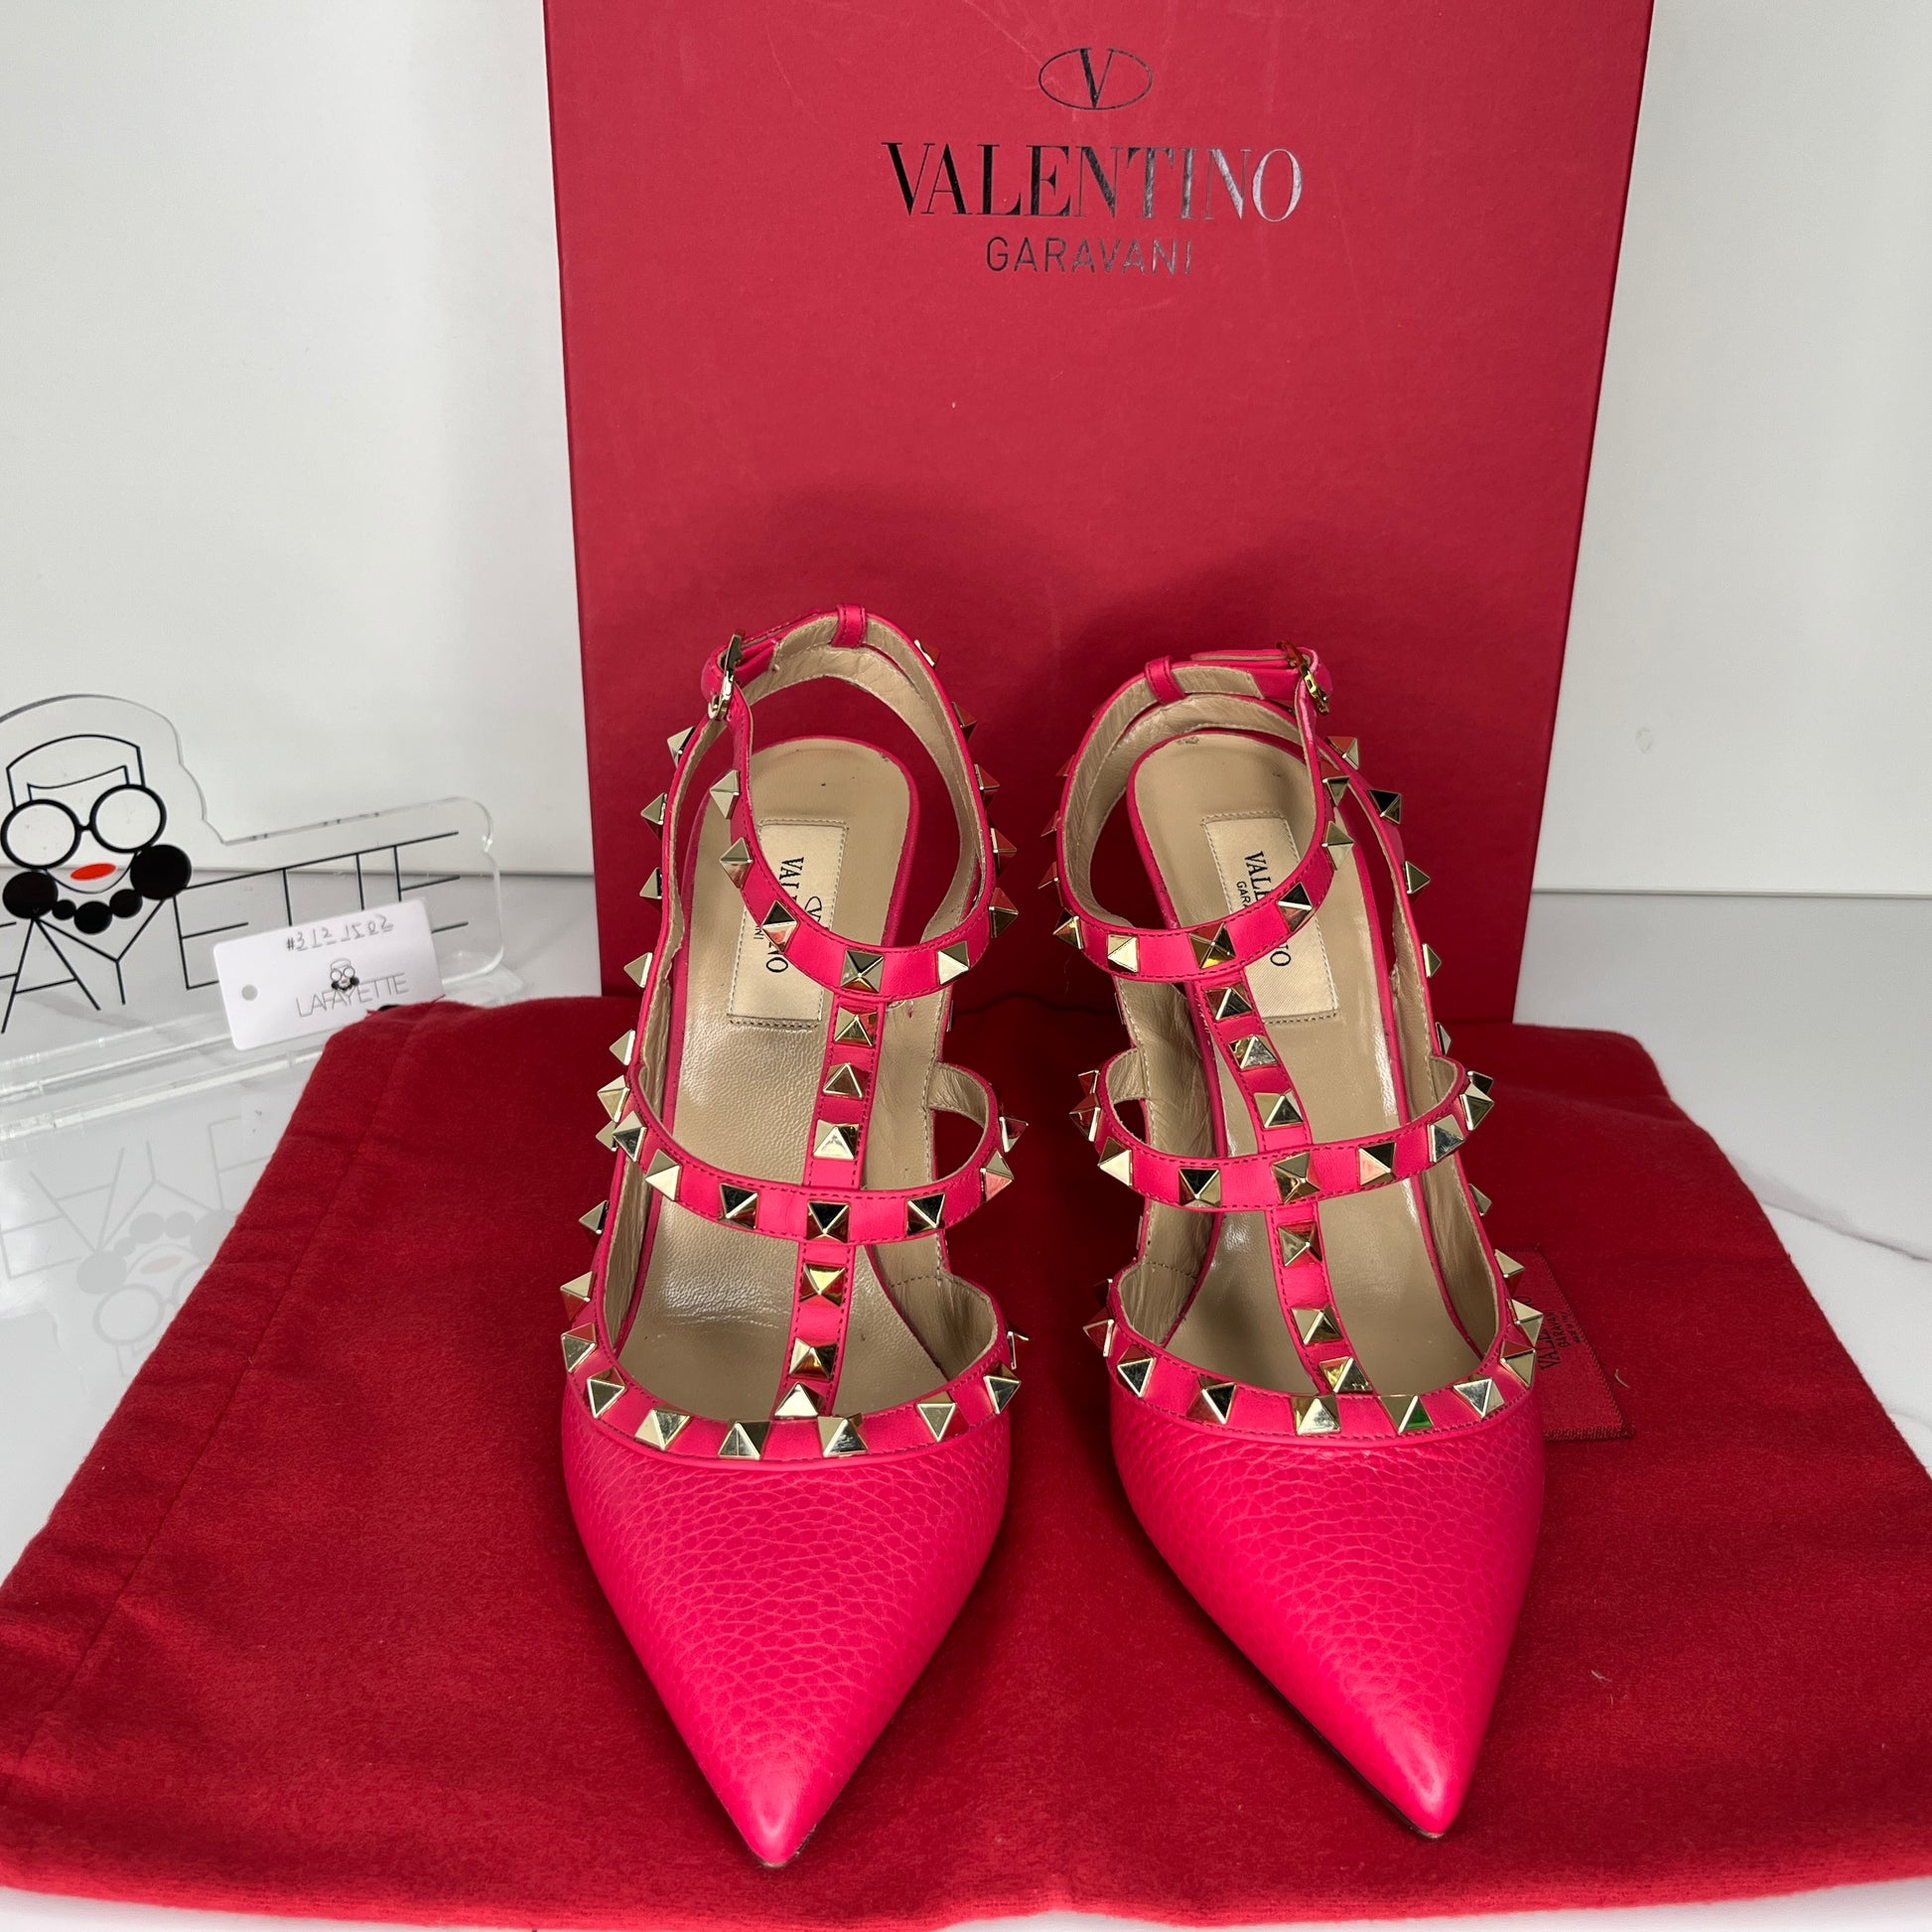 Authentic Valentino Rockstud Pumps in Hot Pink color